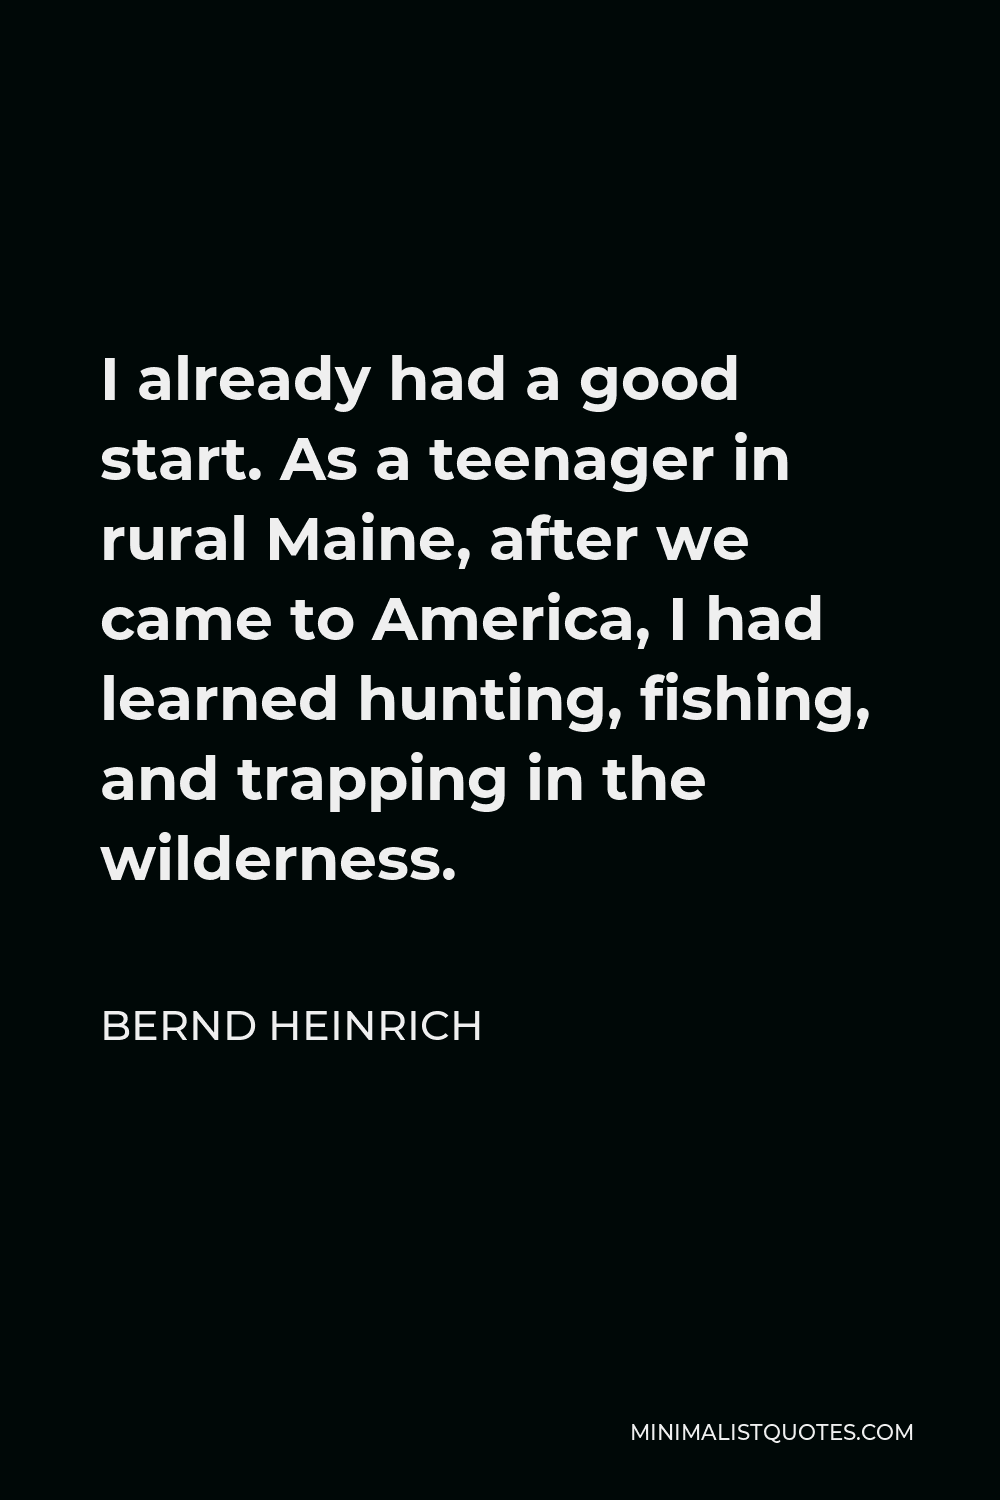 Bernd Heinrich Quote - I already had a good start. As a teenager in rural Maine, after we came to America, I had learned hunting, fishing, and trapping in the wilderness.